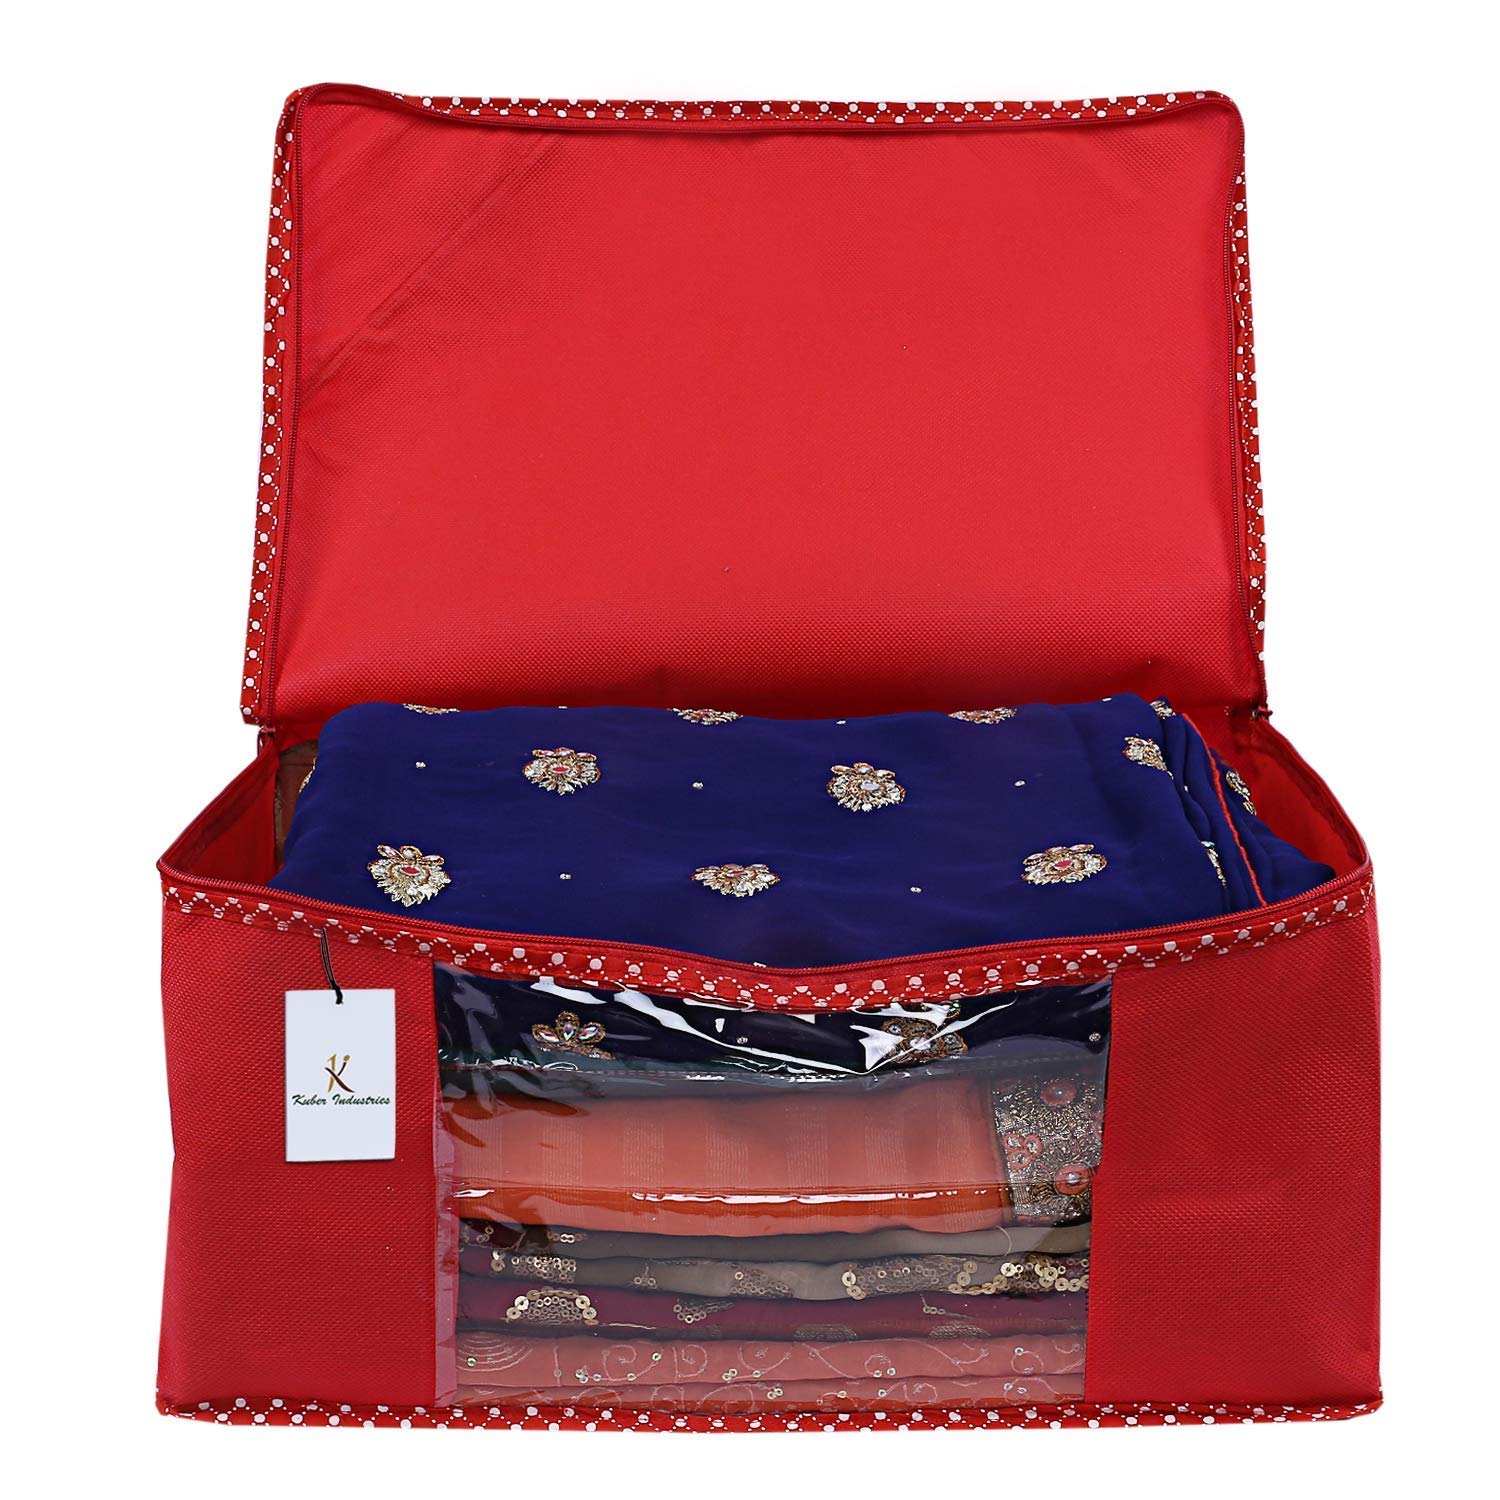 Kuber Industries 9 Piece Non Woven Fabric Saree Cover Set with Transparent Window, Extra Large, Red-CTKTC31882